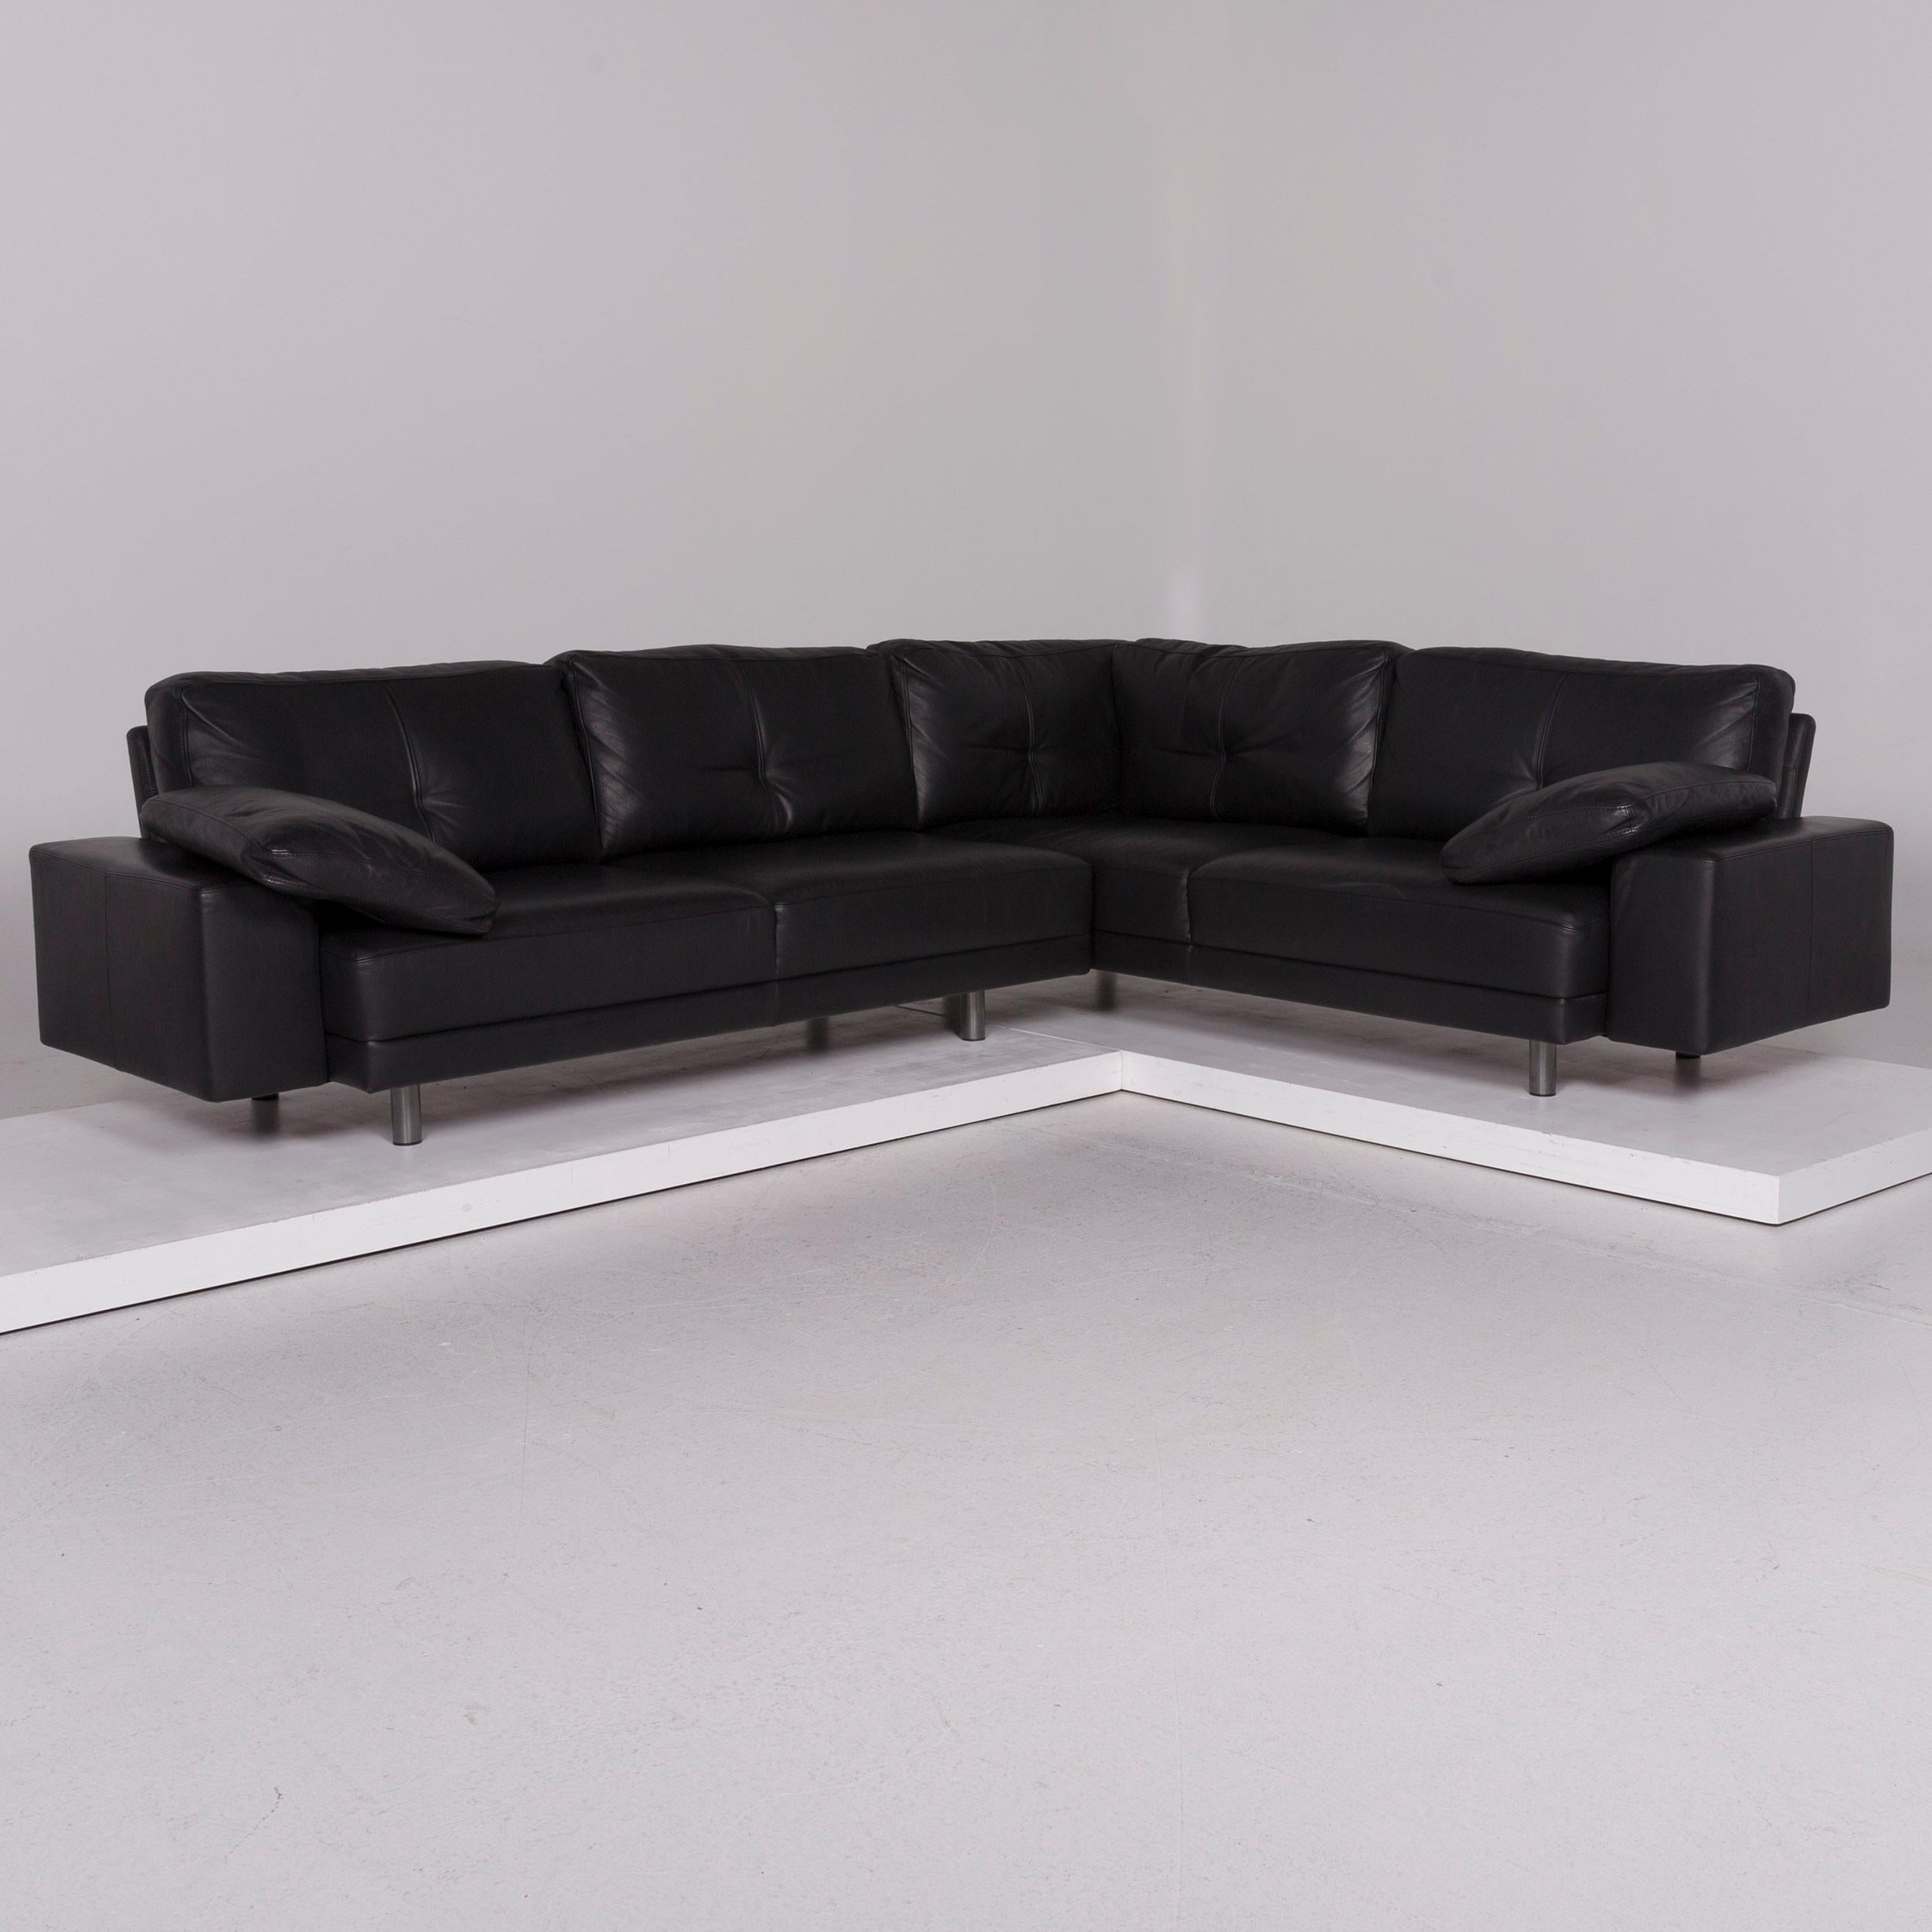 We bring to you a Brühl & Sippold leather sofa set black corner sofa stool.

 

 Product measurements in centimeters:
 

Depth 87
Width 280
Height 89
Seat-height 41
Rest-height 62
Seat-depth 53
Seat-width 204
Back-height 32.
 